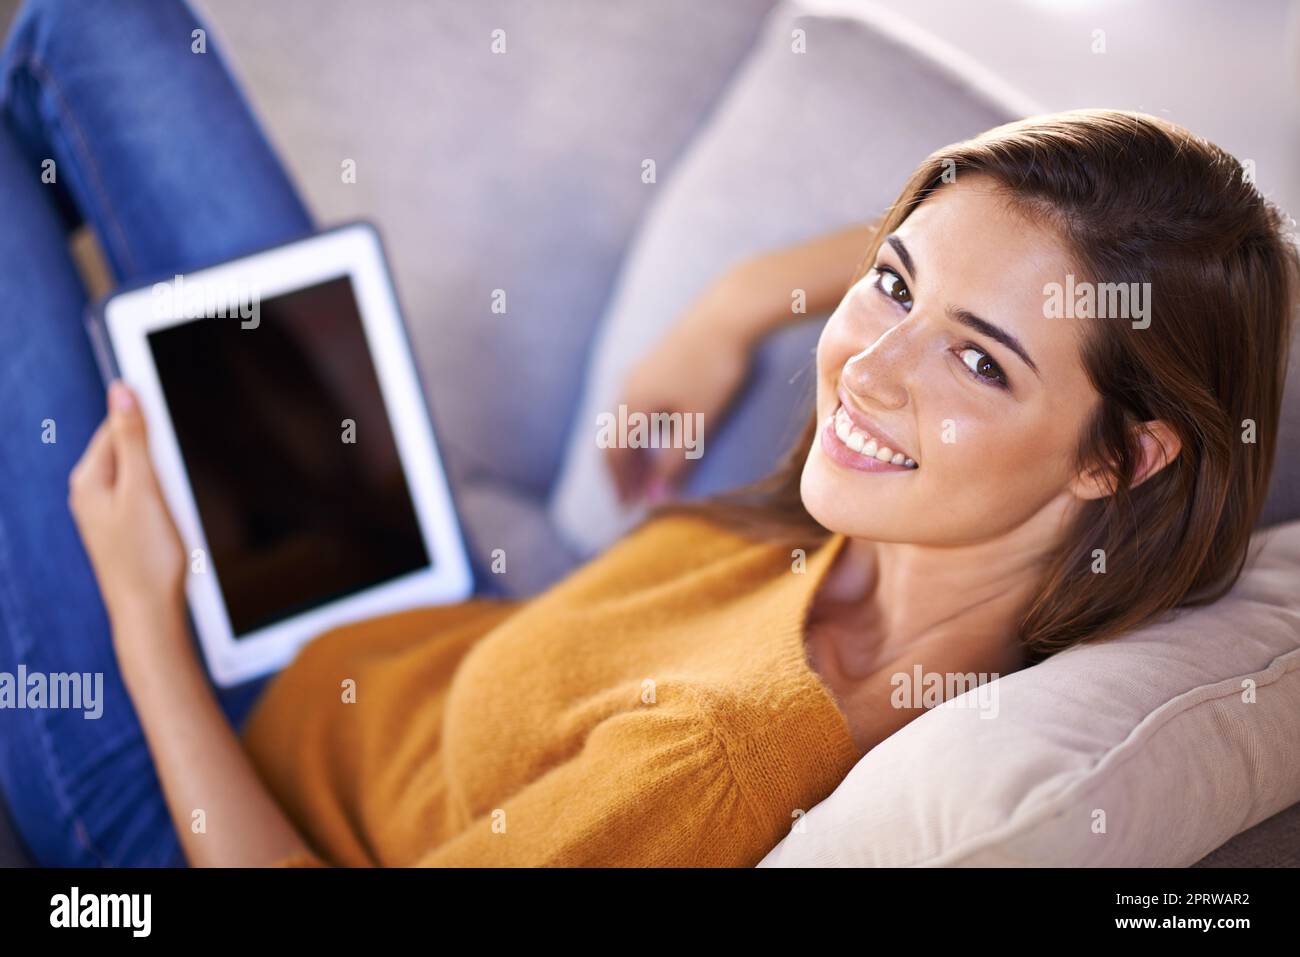 Getting in some sofa time. a gorgeous young woman using a digital tablet indoors. Stock Photo